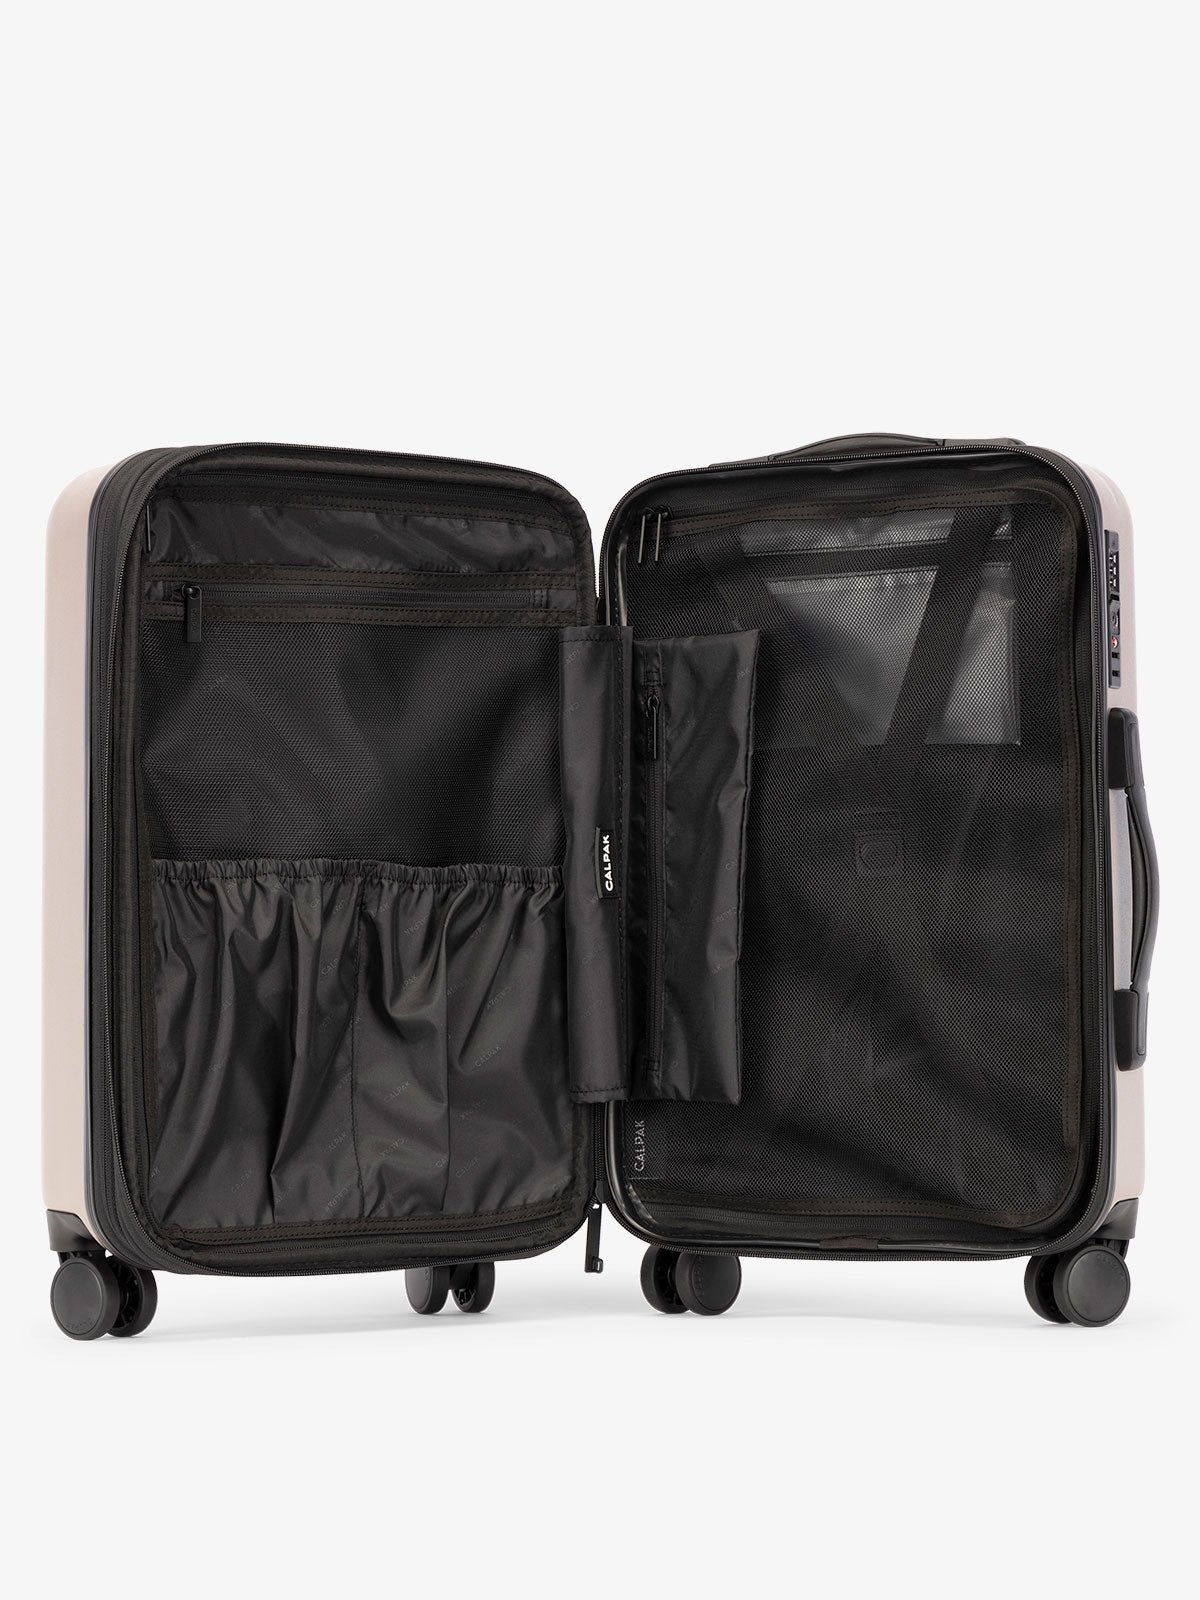 CALPAK Evry Carry-On Luggage features divided compartments with interior pockets for organized packing in brown chocolate